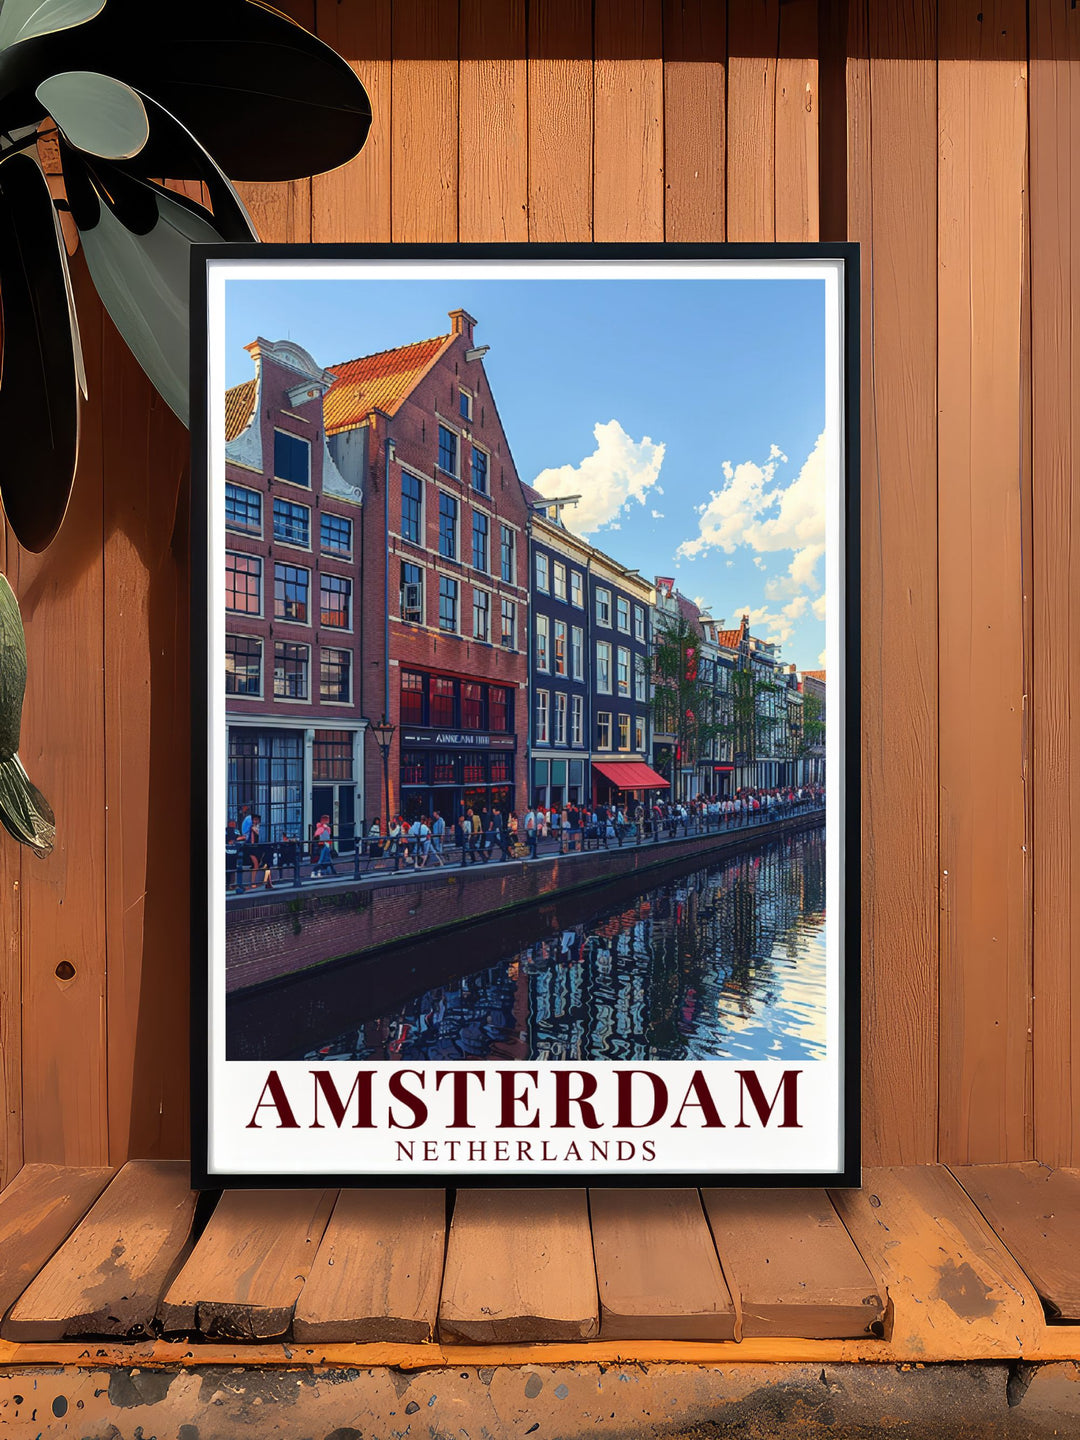 Beautifully detailed Amsterdam print featuring the Anne Frank House. This Amsterdam poster is a great addition to any art collection. Perfect for those who appreciate the citys architectural beauty and historical significance. Ideal for home decor.